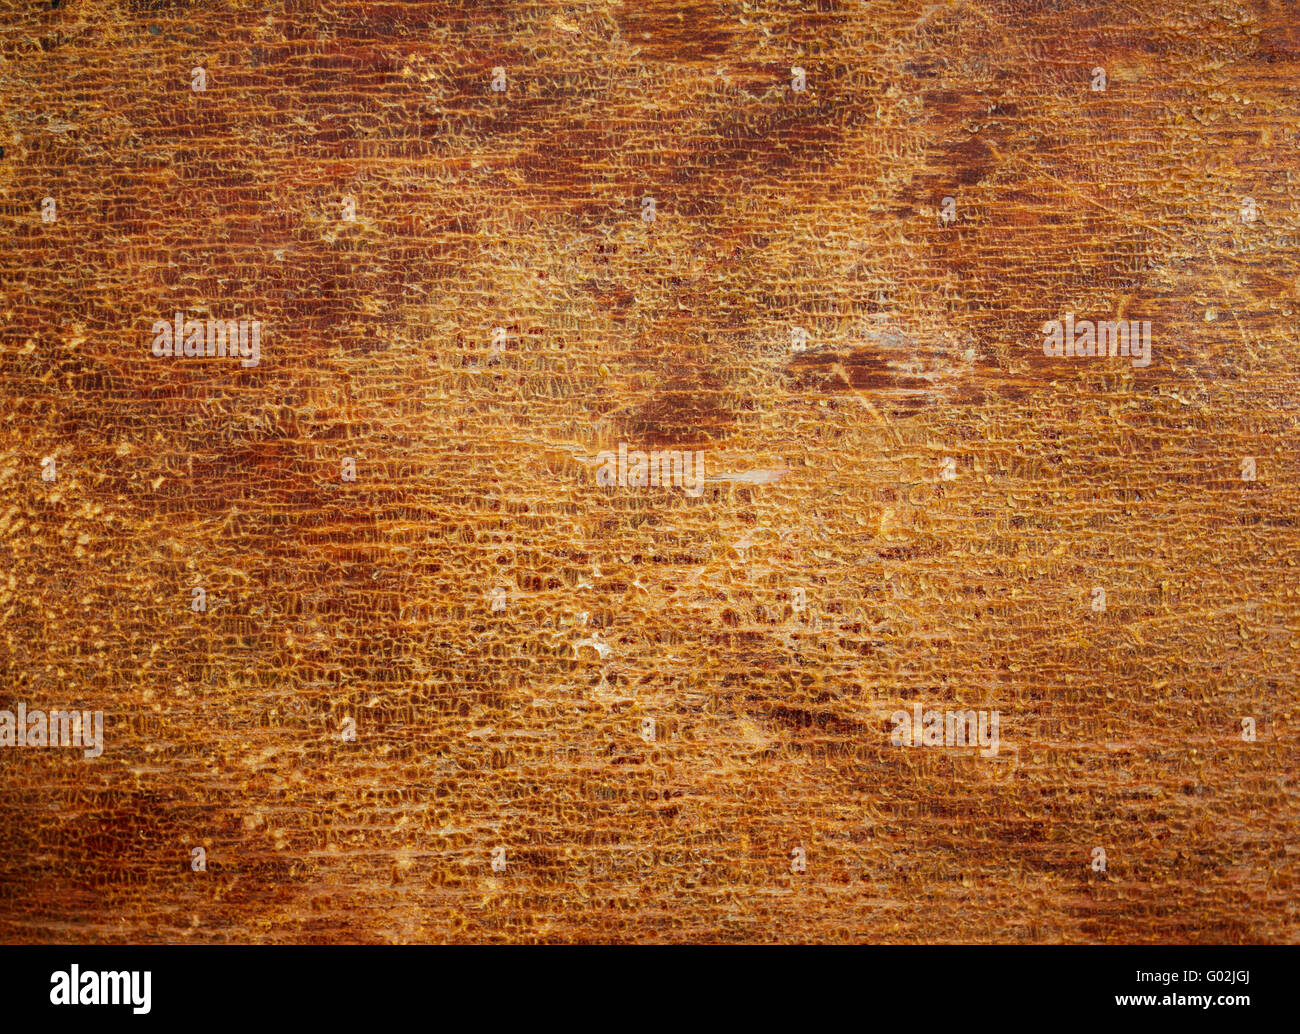 Wood texture with the old cracked varnish surface. Stock Photo